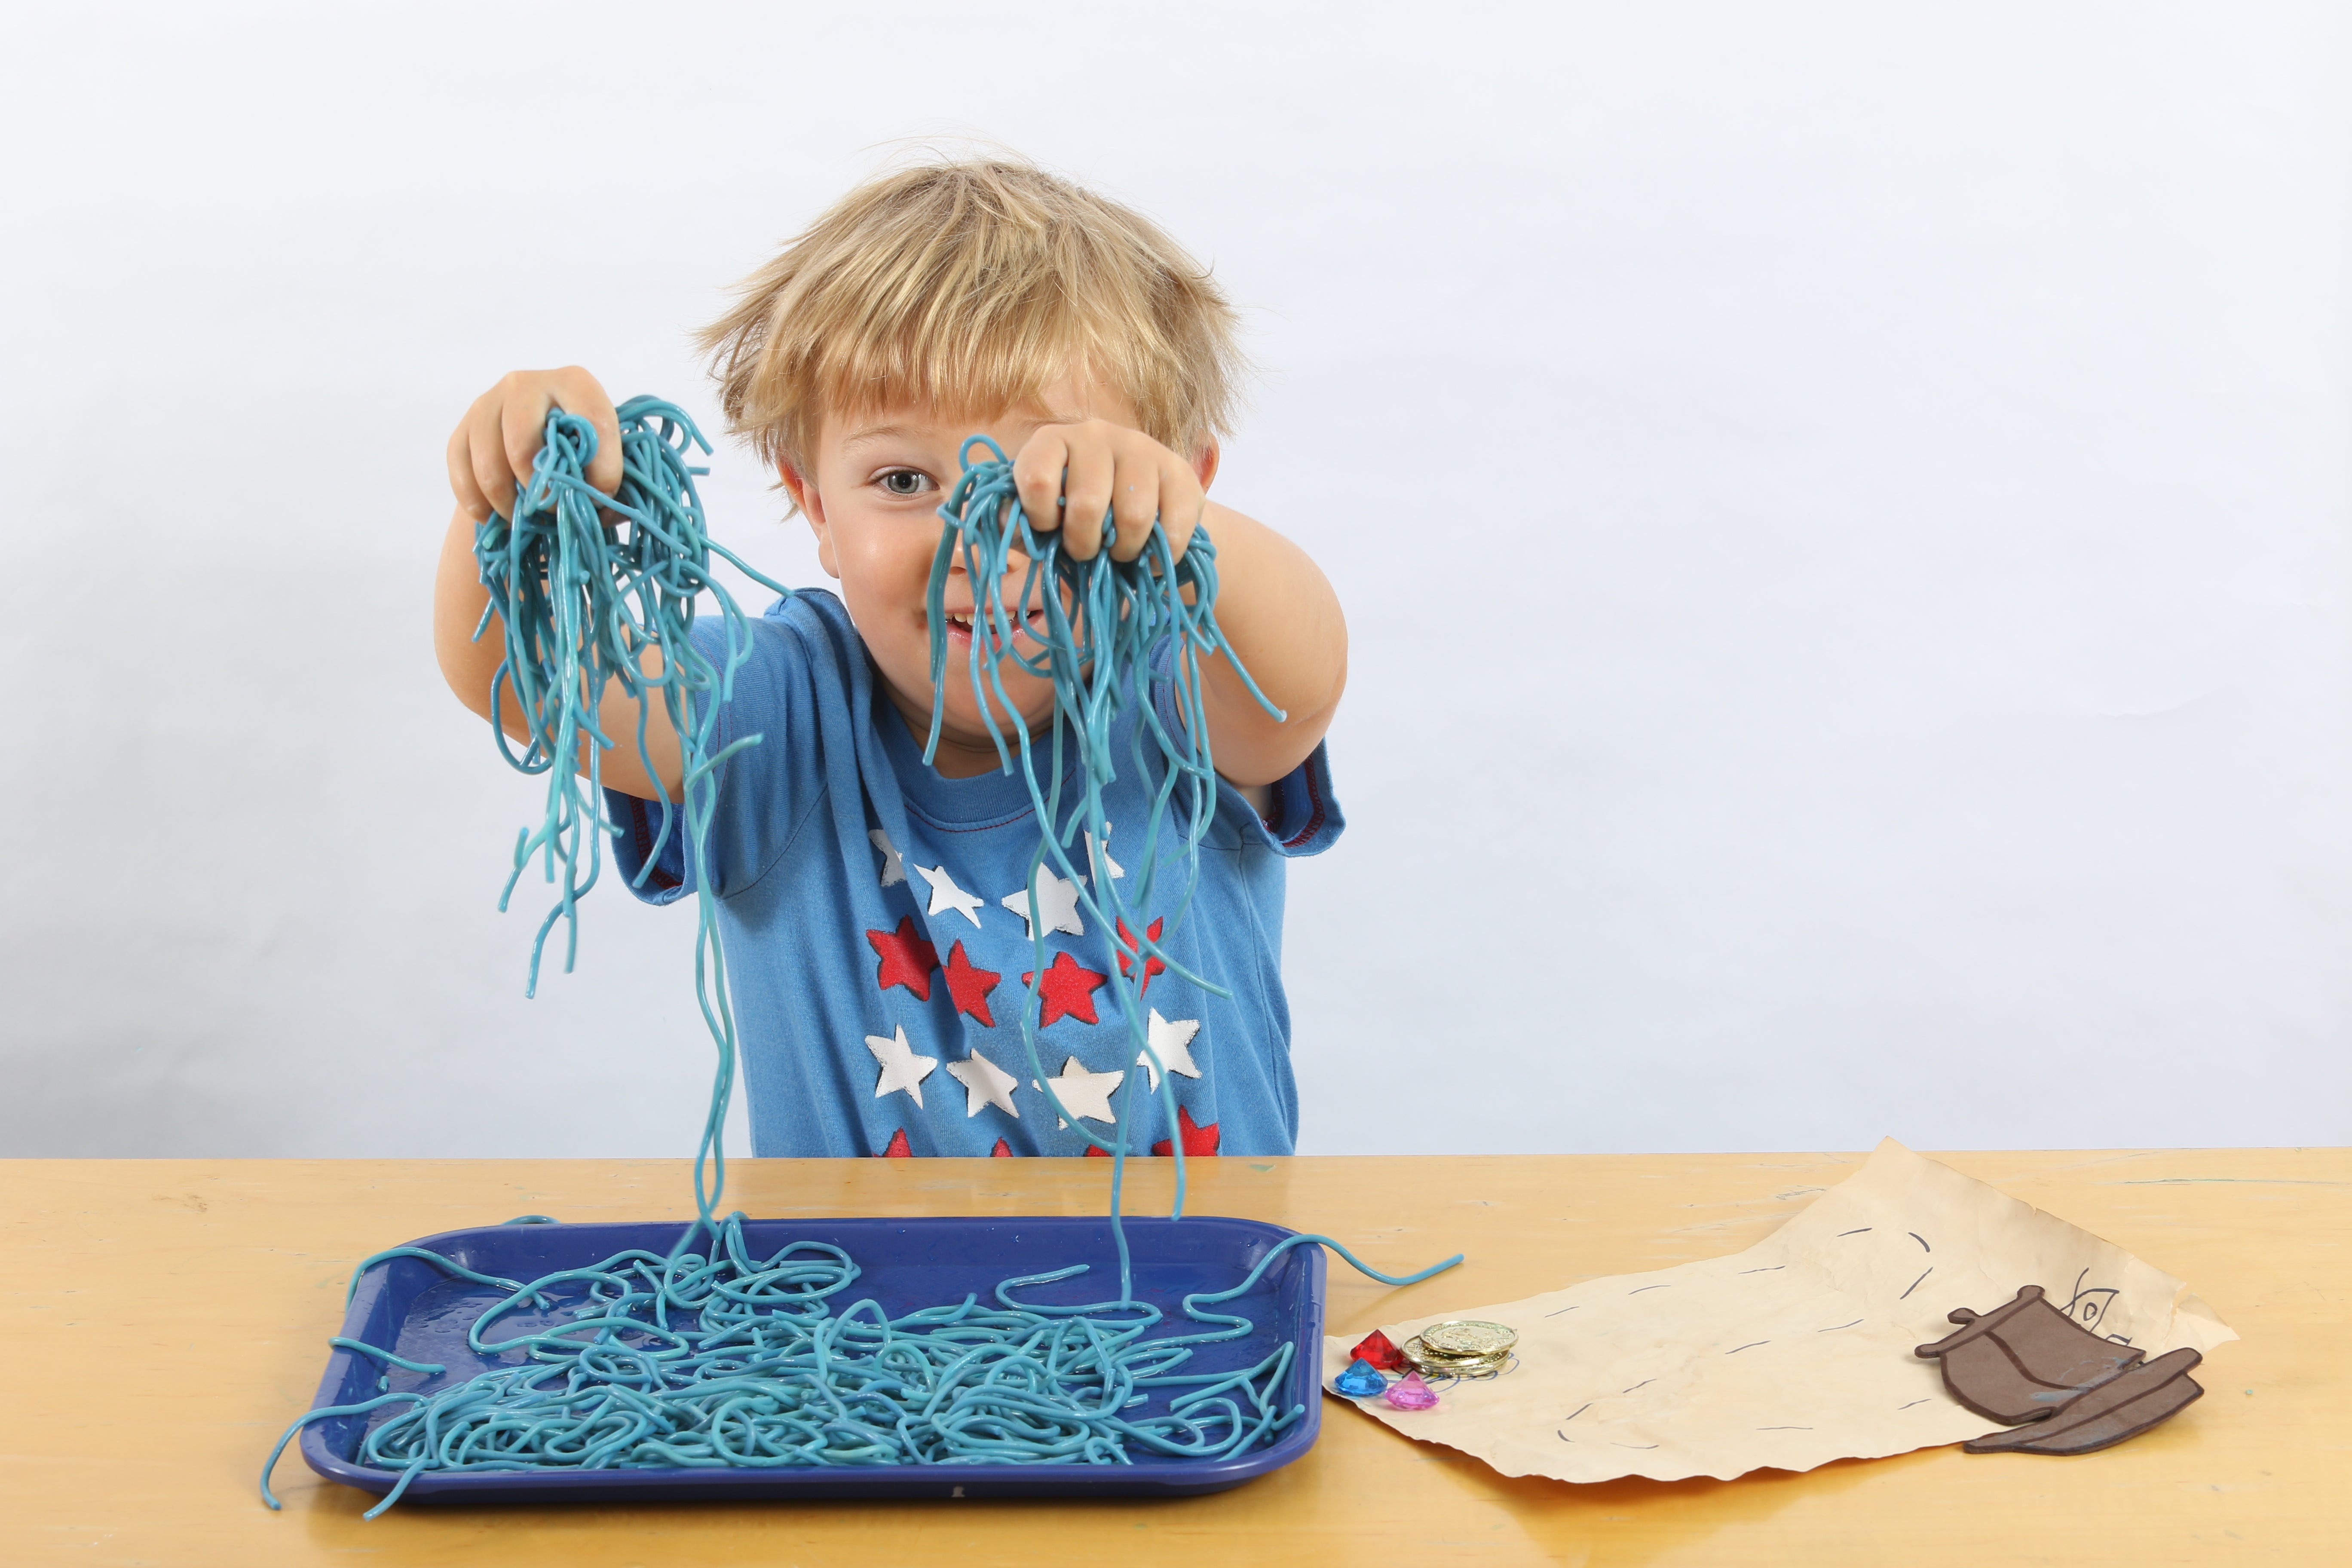 Messy Kid with Paint Pallete Stock Image - Image of craft